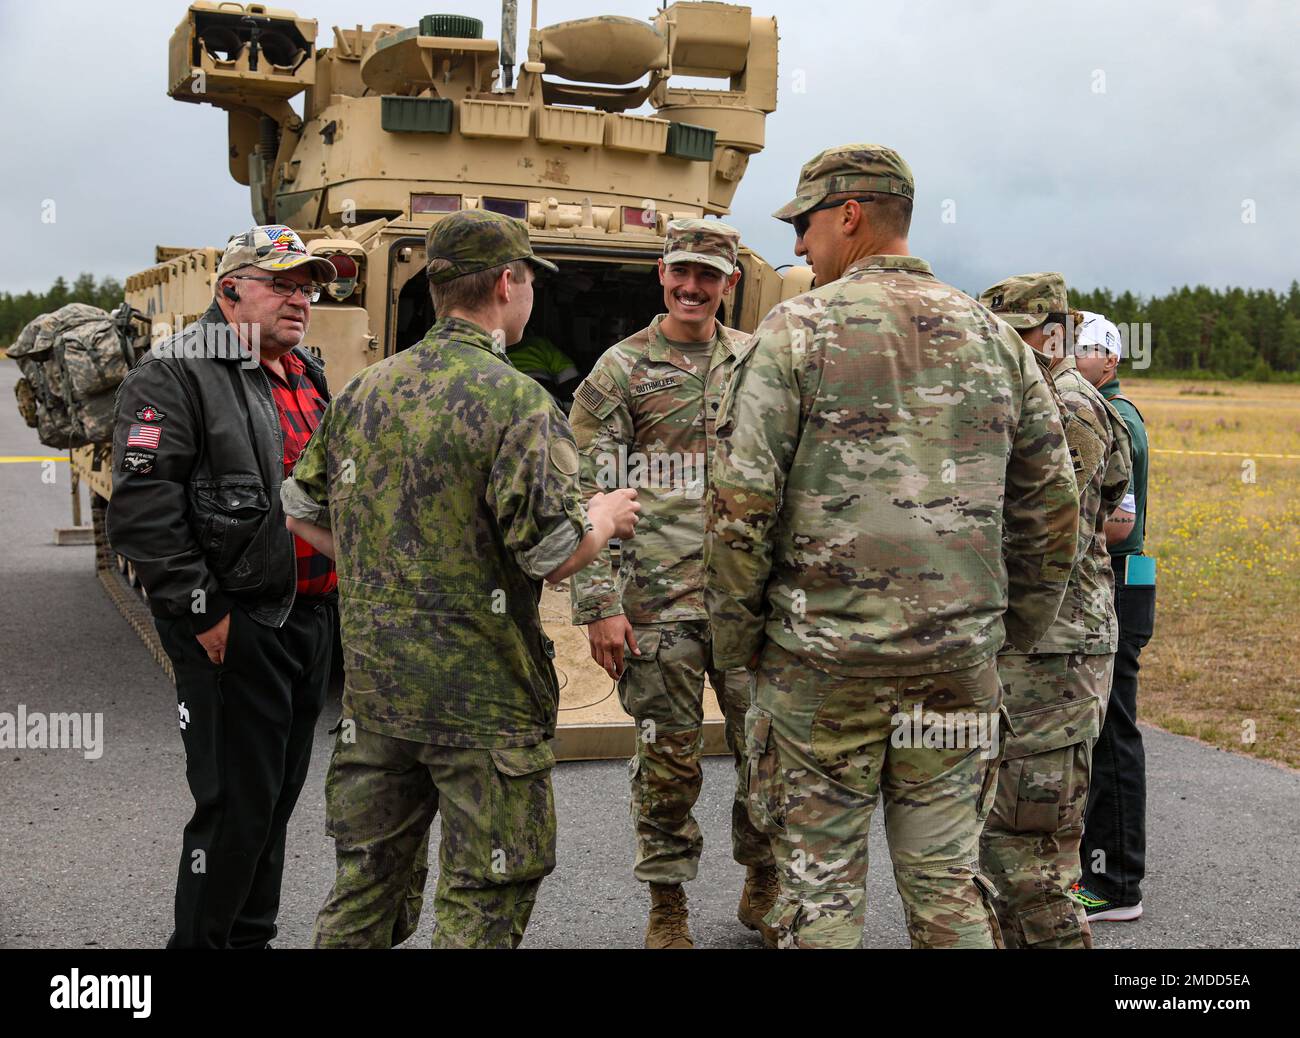 U.S. Soldiers assigned to the 4th Squadron, 10th Cavalry Regiment, 3rd Armored Brigade Combat Team, 4th Infantry Division, speak with Finnish citizens at a static display during the Oripää Airshow at Säkylä, Finland, July 16, 2022. The 3rd Armored Brigade Combat Team, 4th Infantry Division, and the Pori Brigade of the Finnish army began summer training in Finland to strengthen relations and help build interoperability between the two nations. Stock Photo